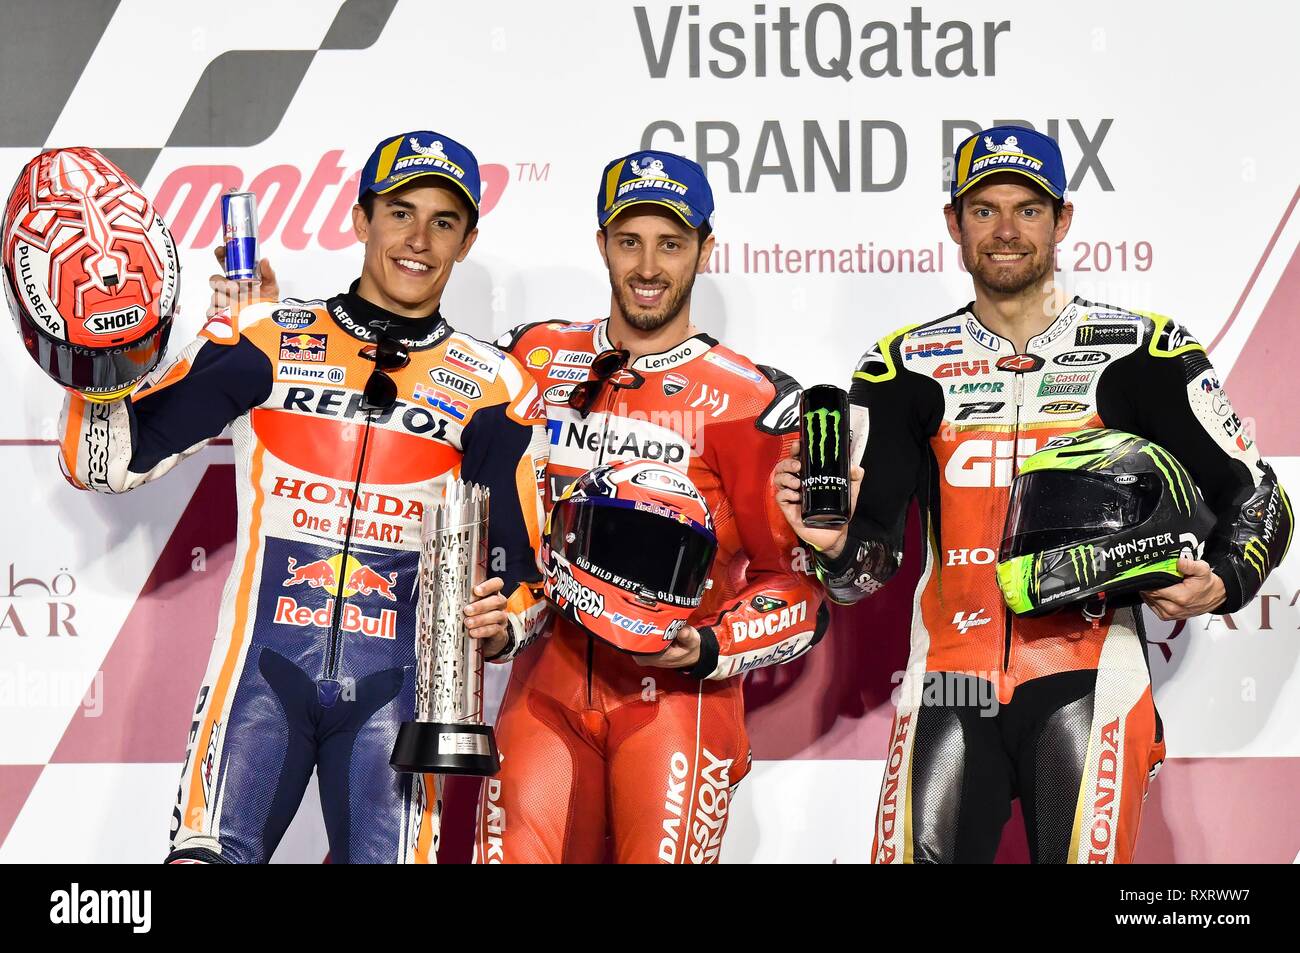 Doha, Qatar. 10th Mar, 2019. Ducati Team's Italian rider Andrea Dovizioso (C), Repsol Honda Team's Spanish rider Marc Marquez (L) and LCR Honda team's British rider Cal Crutchlow pose during the awarding ceremony for the MotoGP race of the 2019 MotoGP Grand Prix of Qatar in Losail Circuit of Doha, capital of Qatar, on March 10, 2019. Andrea Dovizioso claimed the title with 42 minutes and 36.902 seconds. Credit: Nikku/Xinhua/Alamy Live News Stock Photo